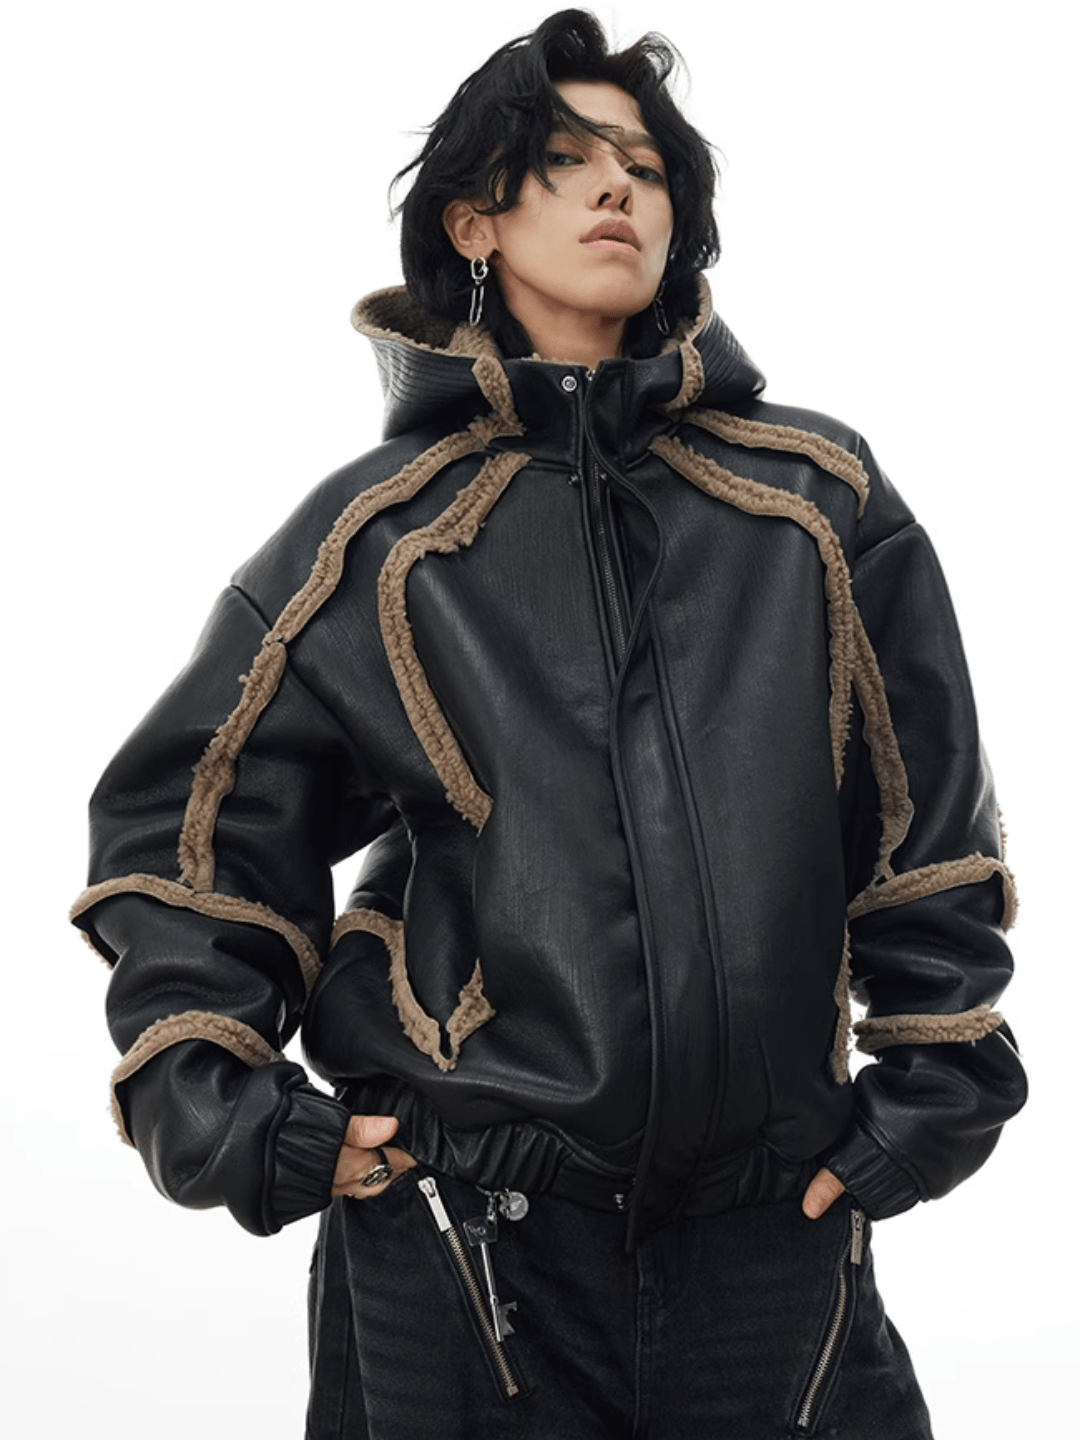 [CROWORLD] Black silhouette hooded short leather jacket na697